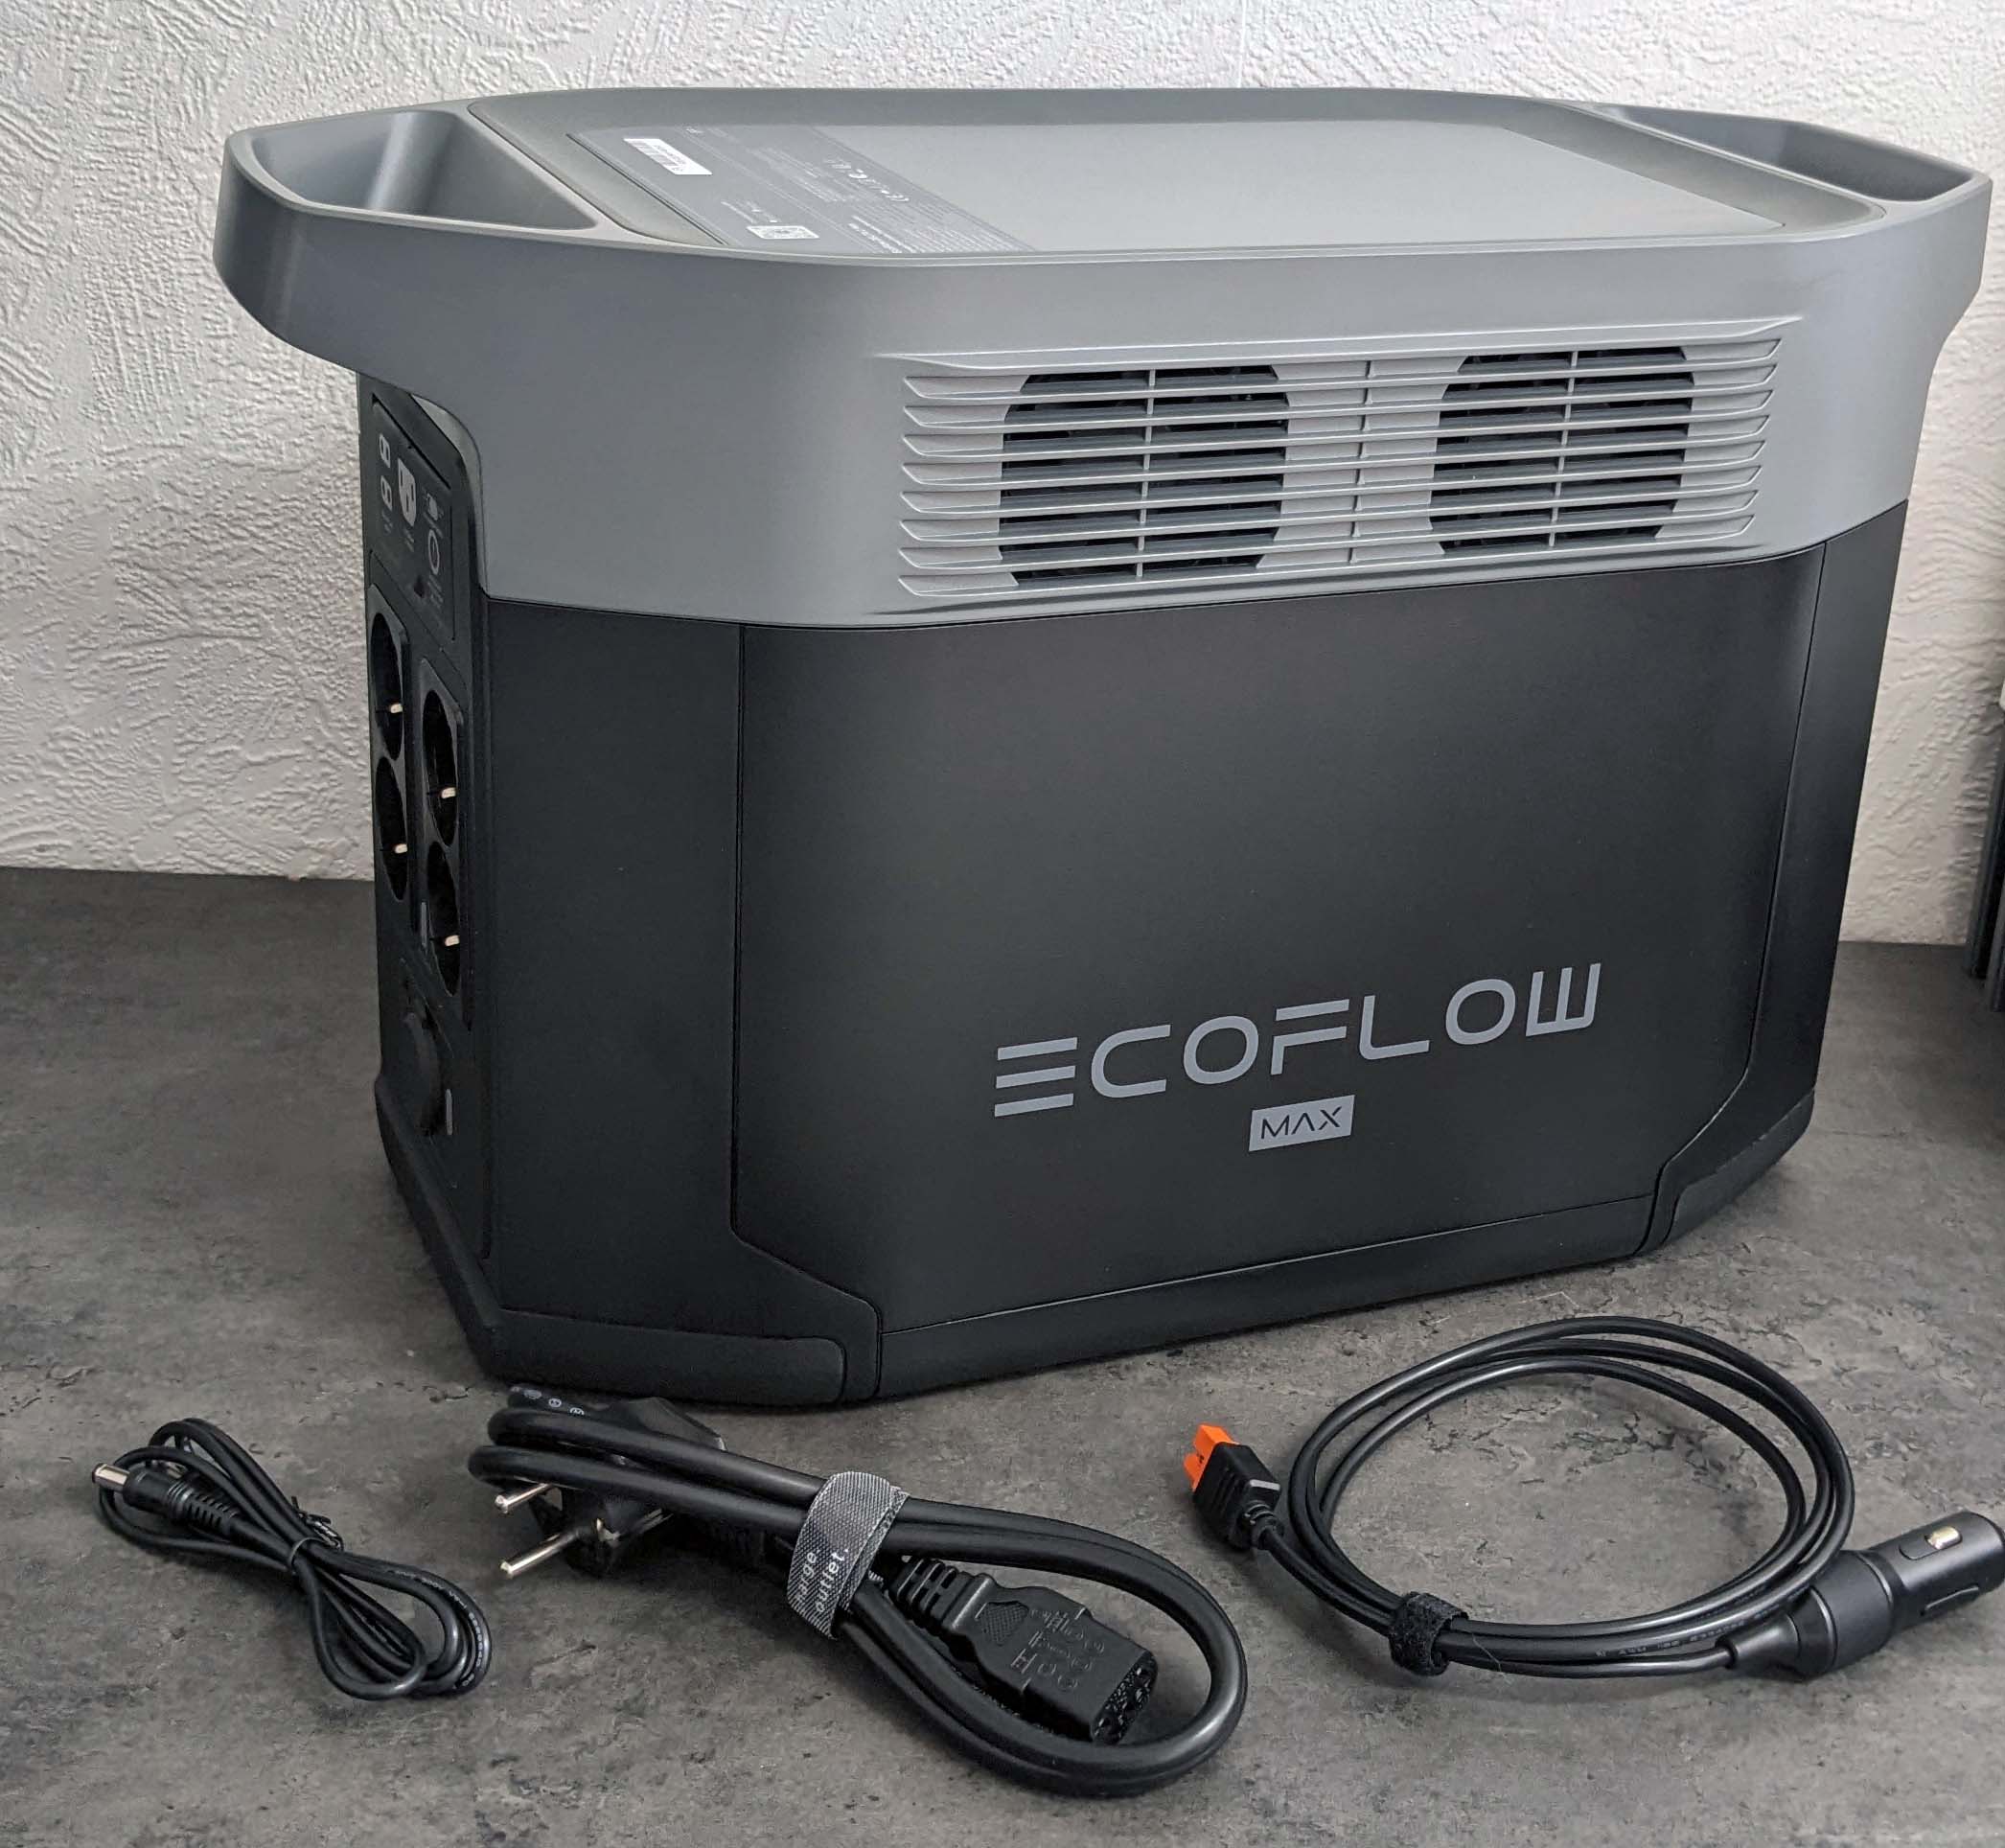 EcoFlow PowerStream inverter and Delta 2 Max Powerstation Review - Balcony  power plant with buffer storage, Part 1